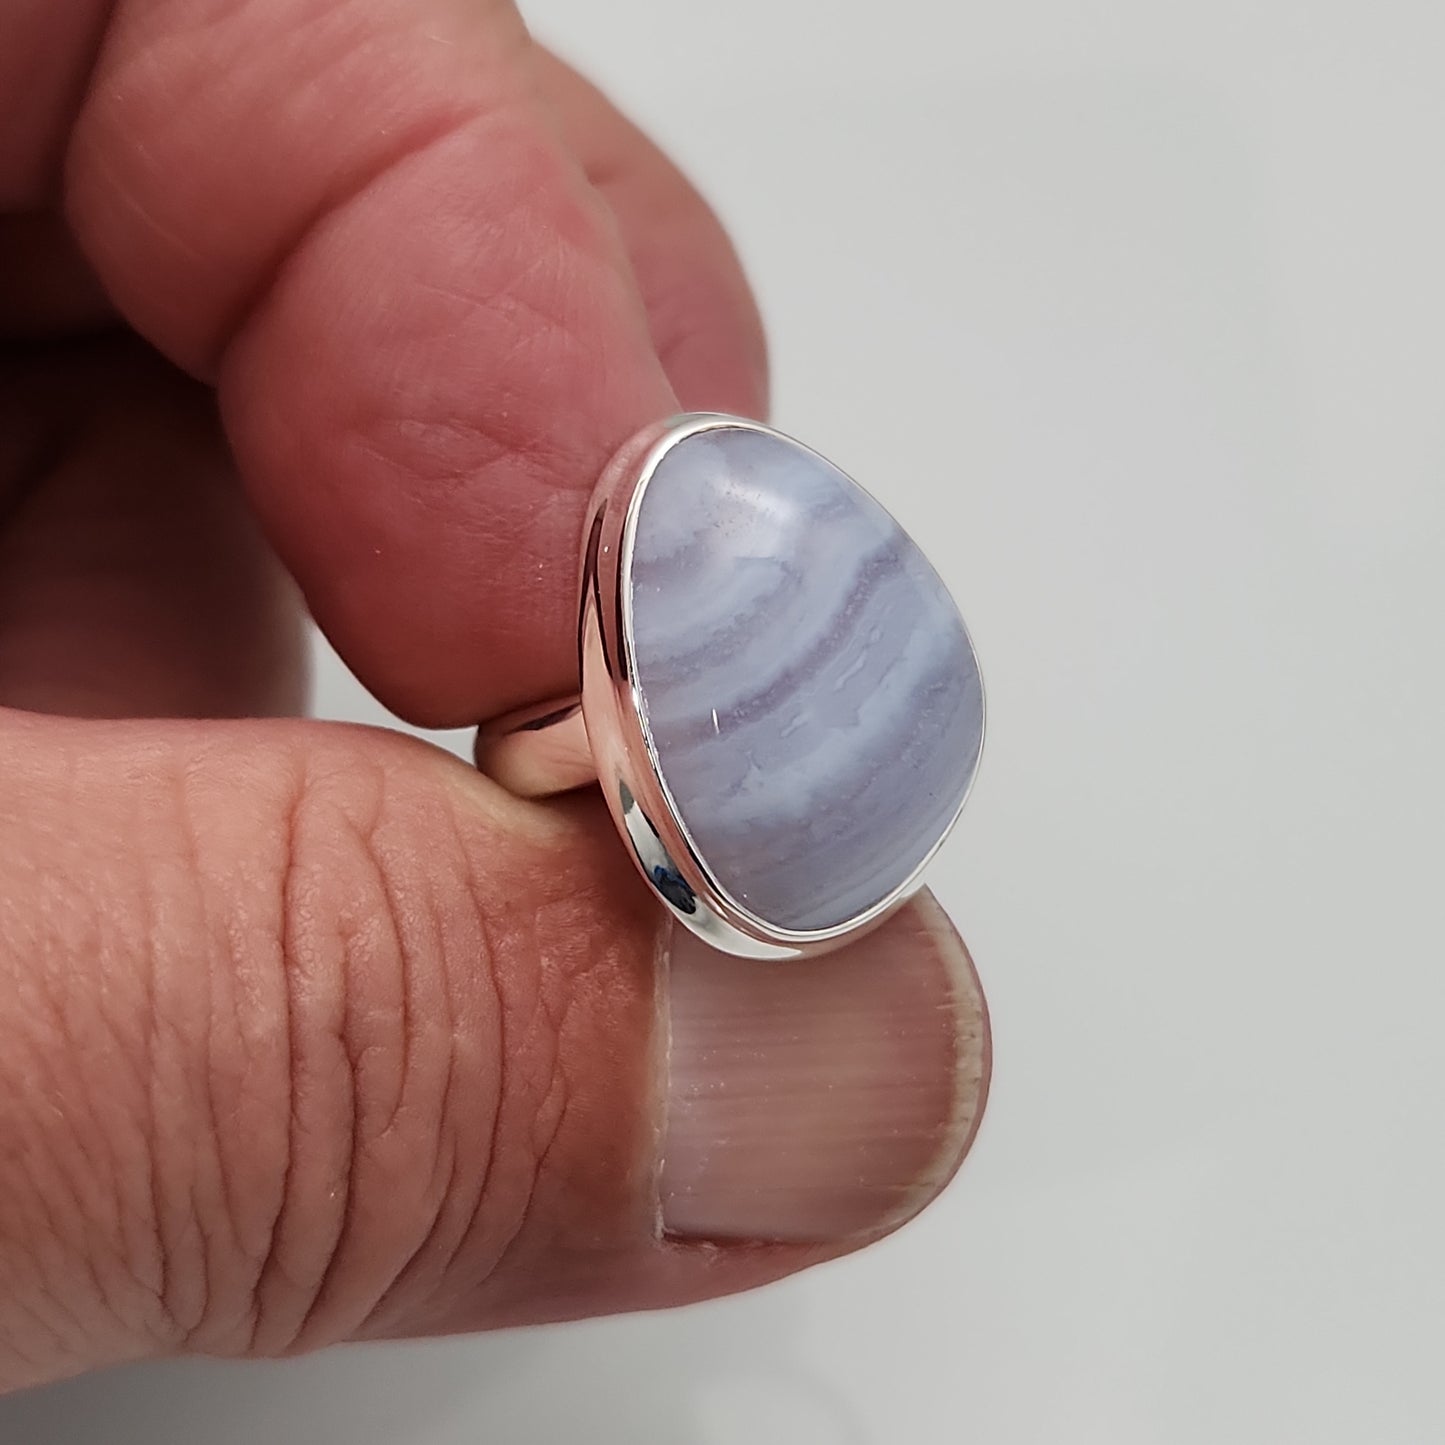 Blue Lace Agate Ring sz 7